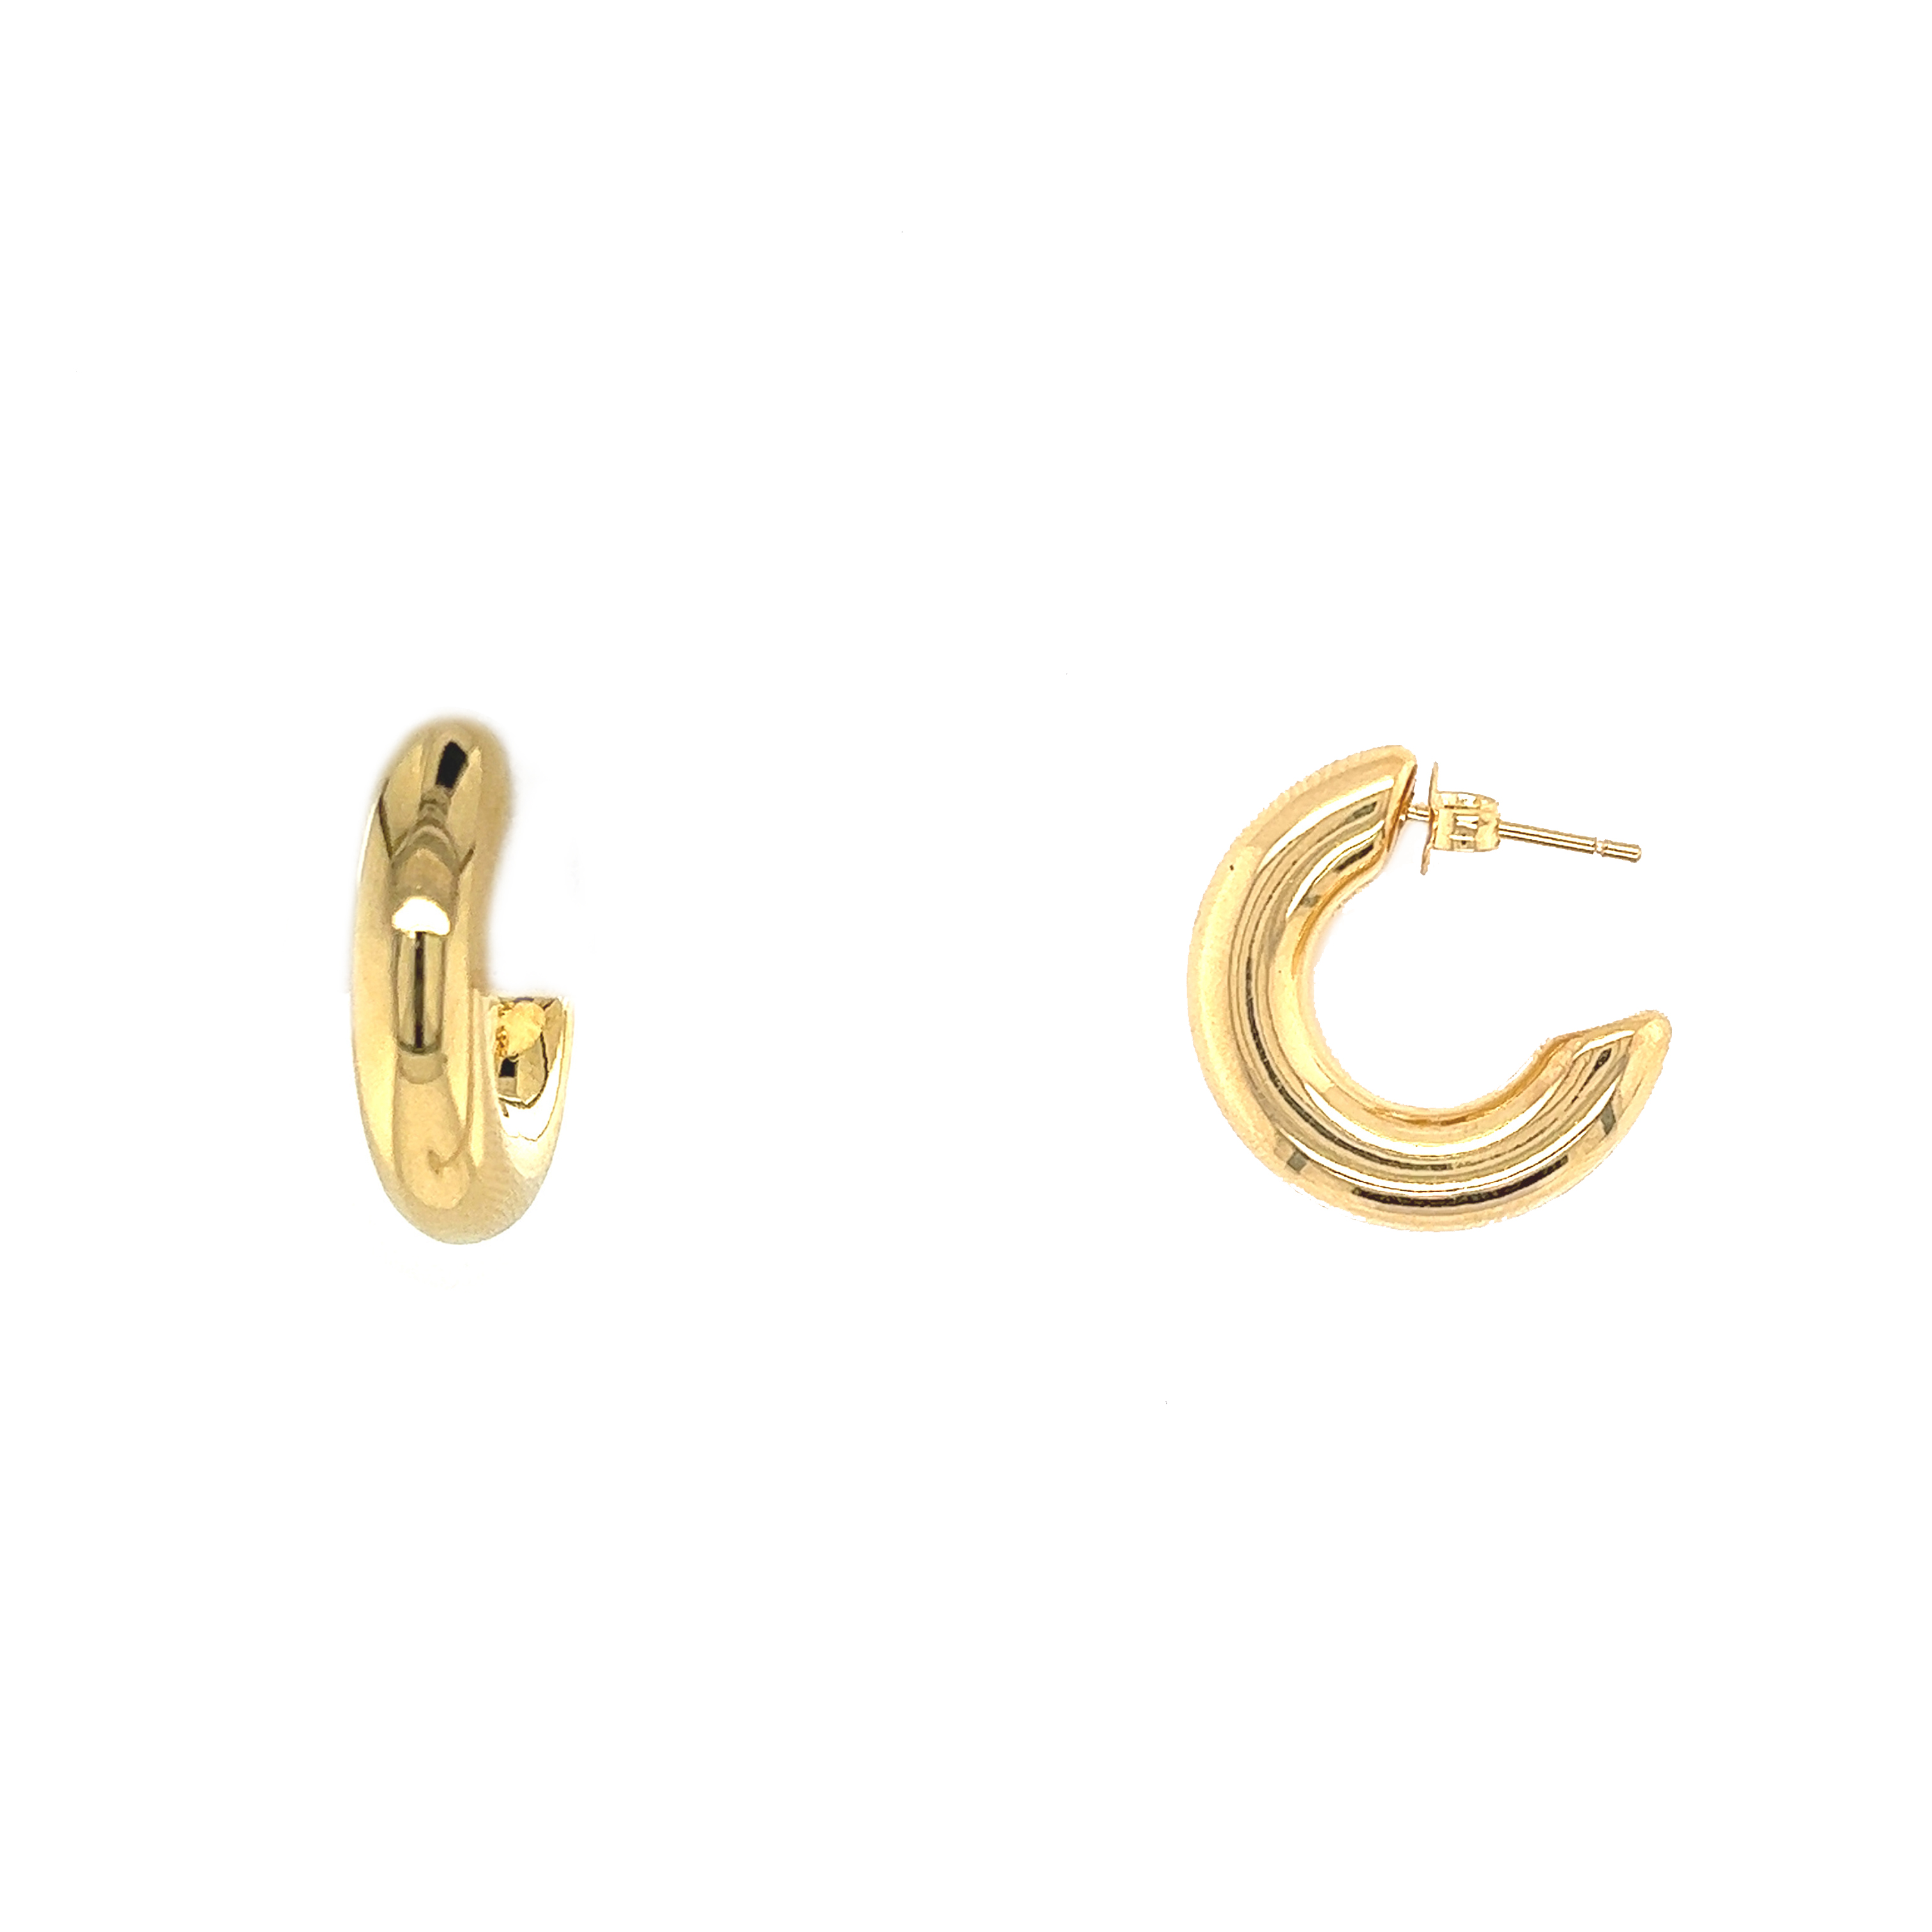 5mm x 20mm Gold Filled Hoops